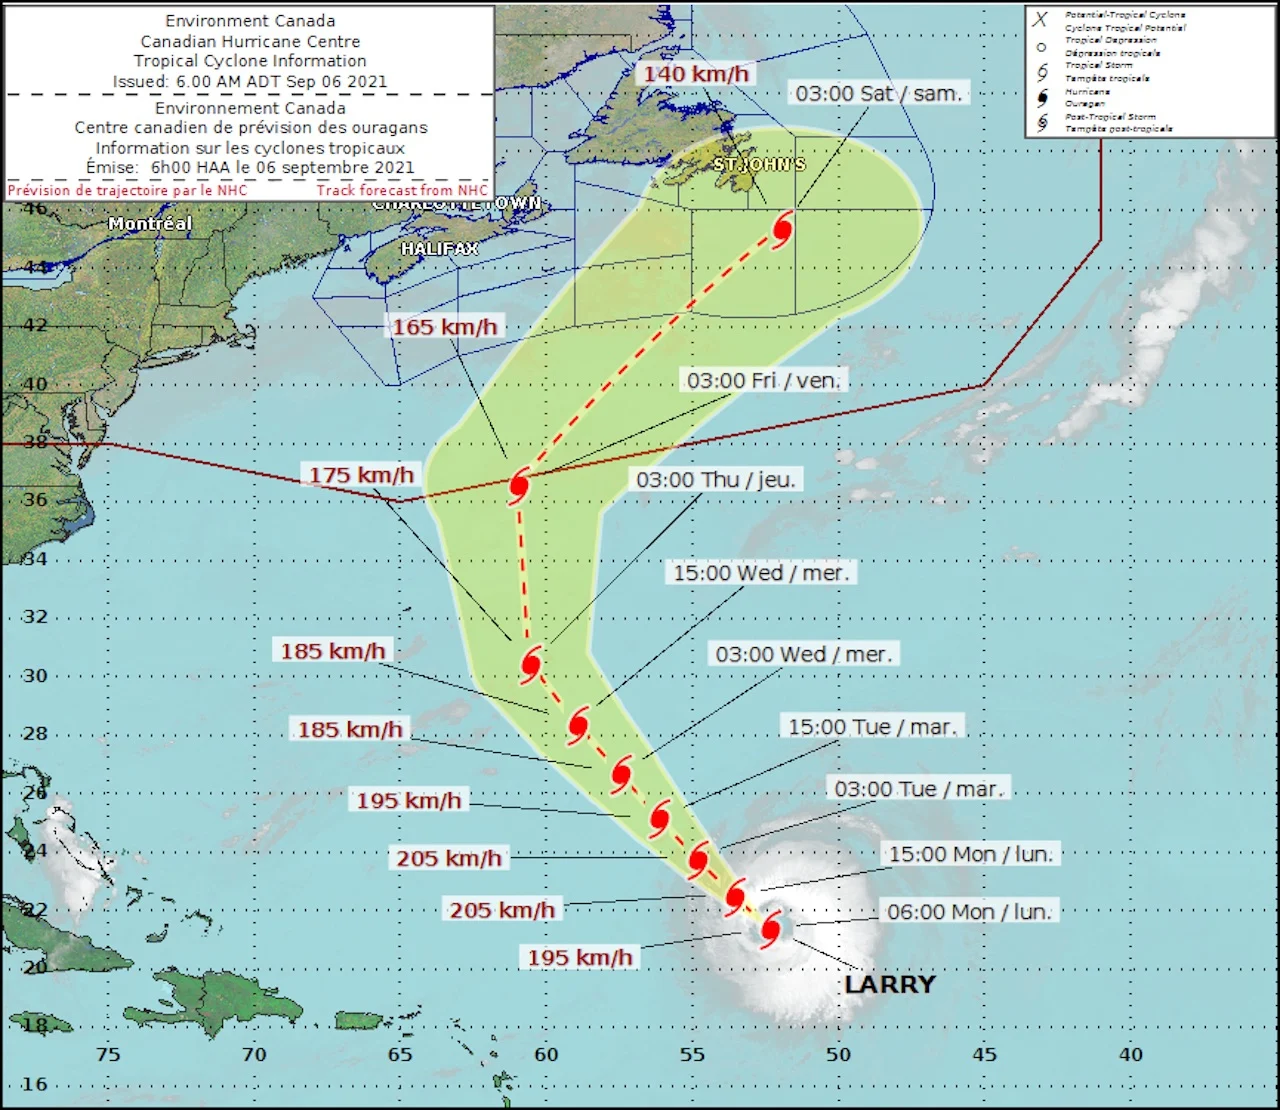 Canadian Hurricane Centre track/Larry